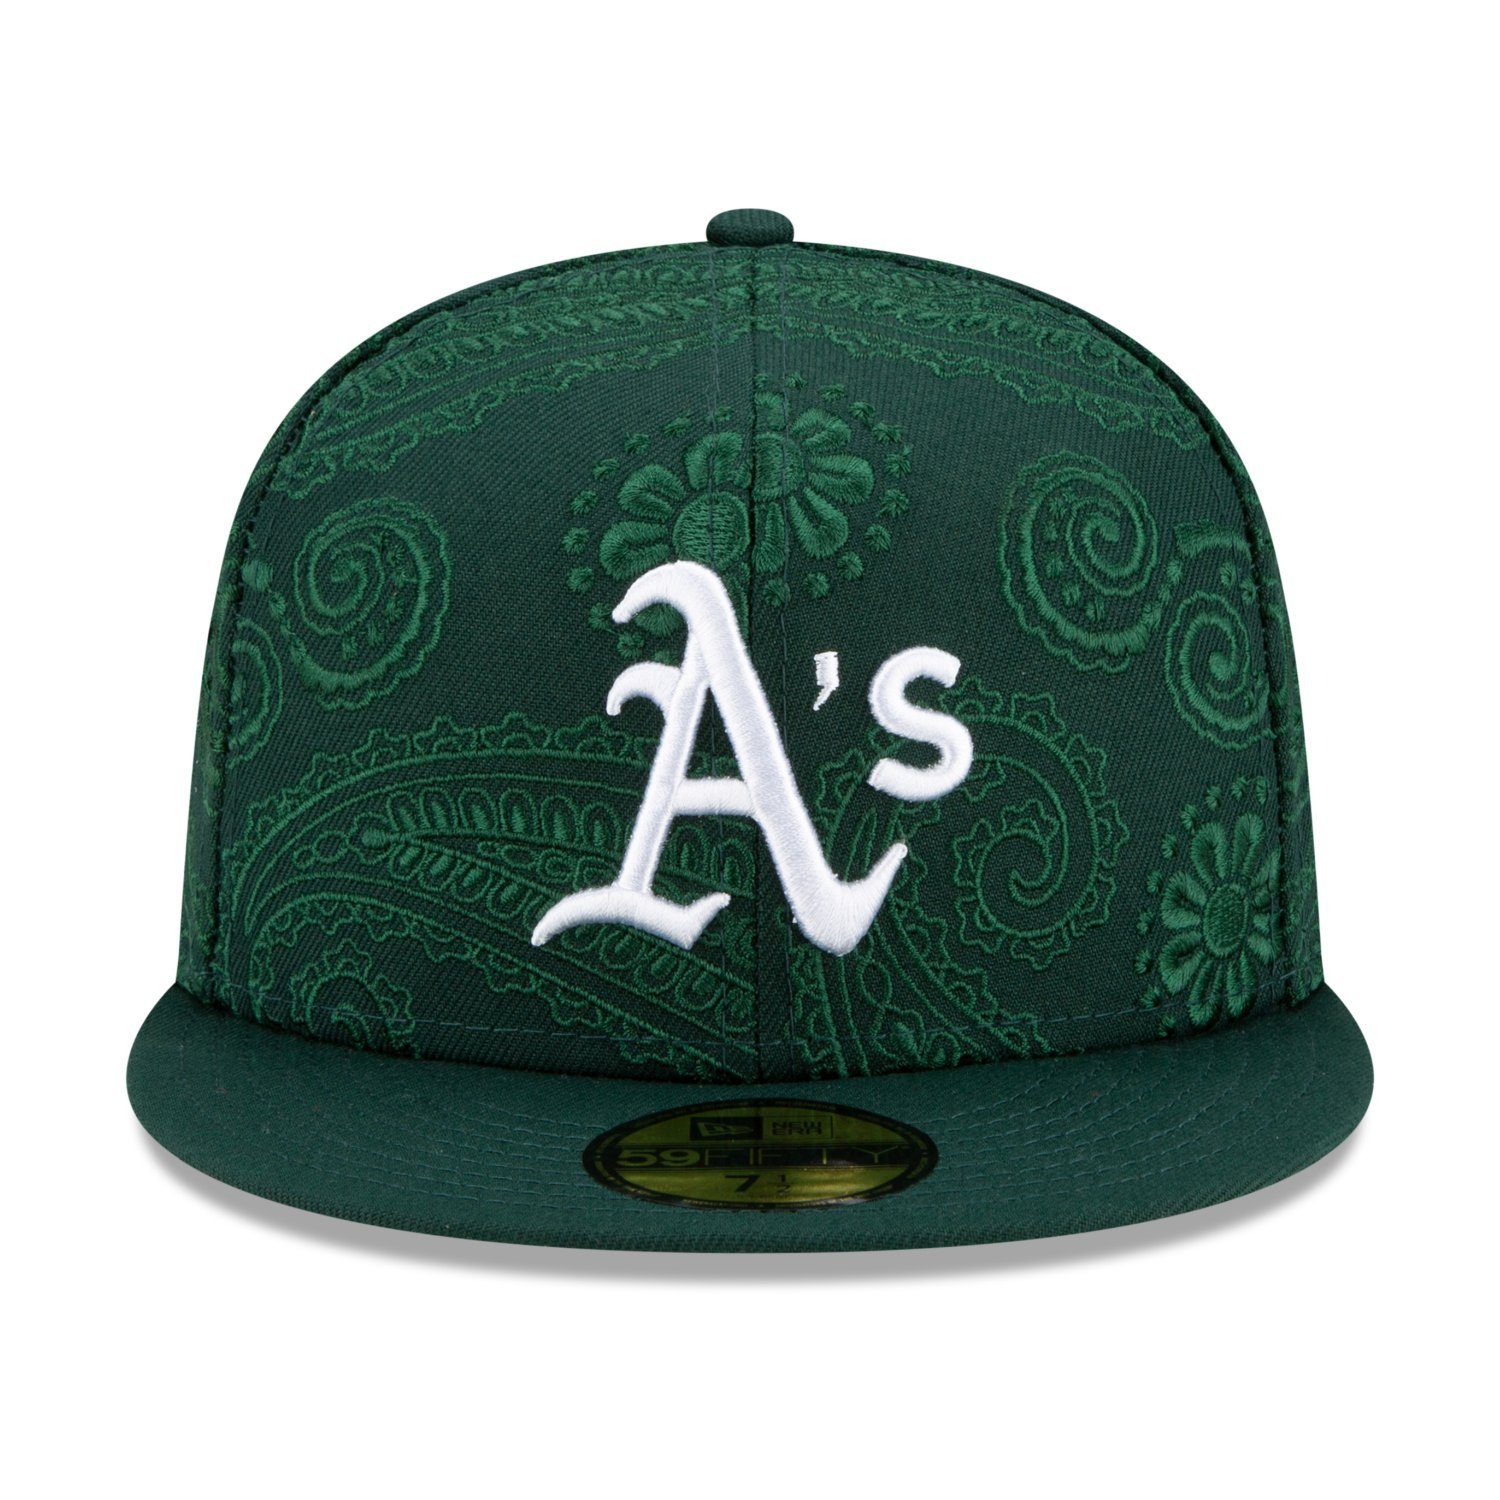 Oakland Fitted Athletics PAISLEY Era Cap SWIRL 59Fifty New